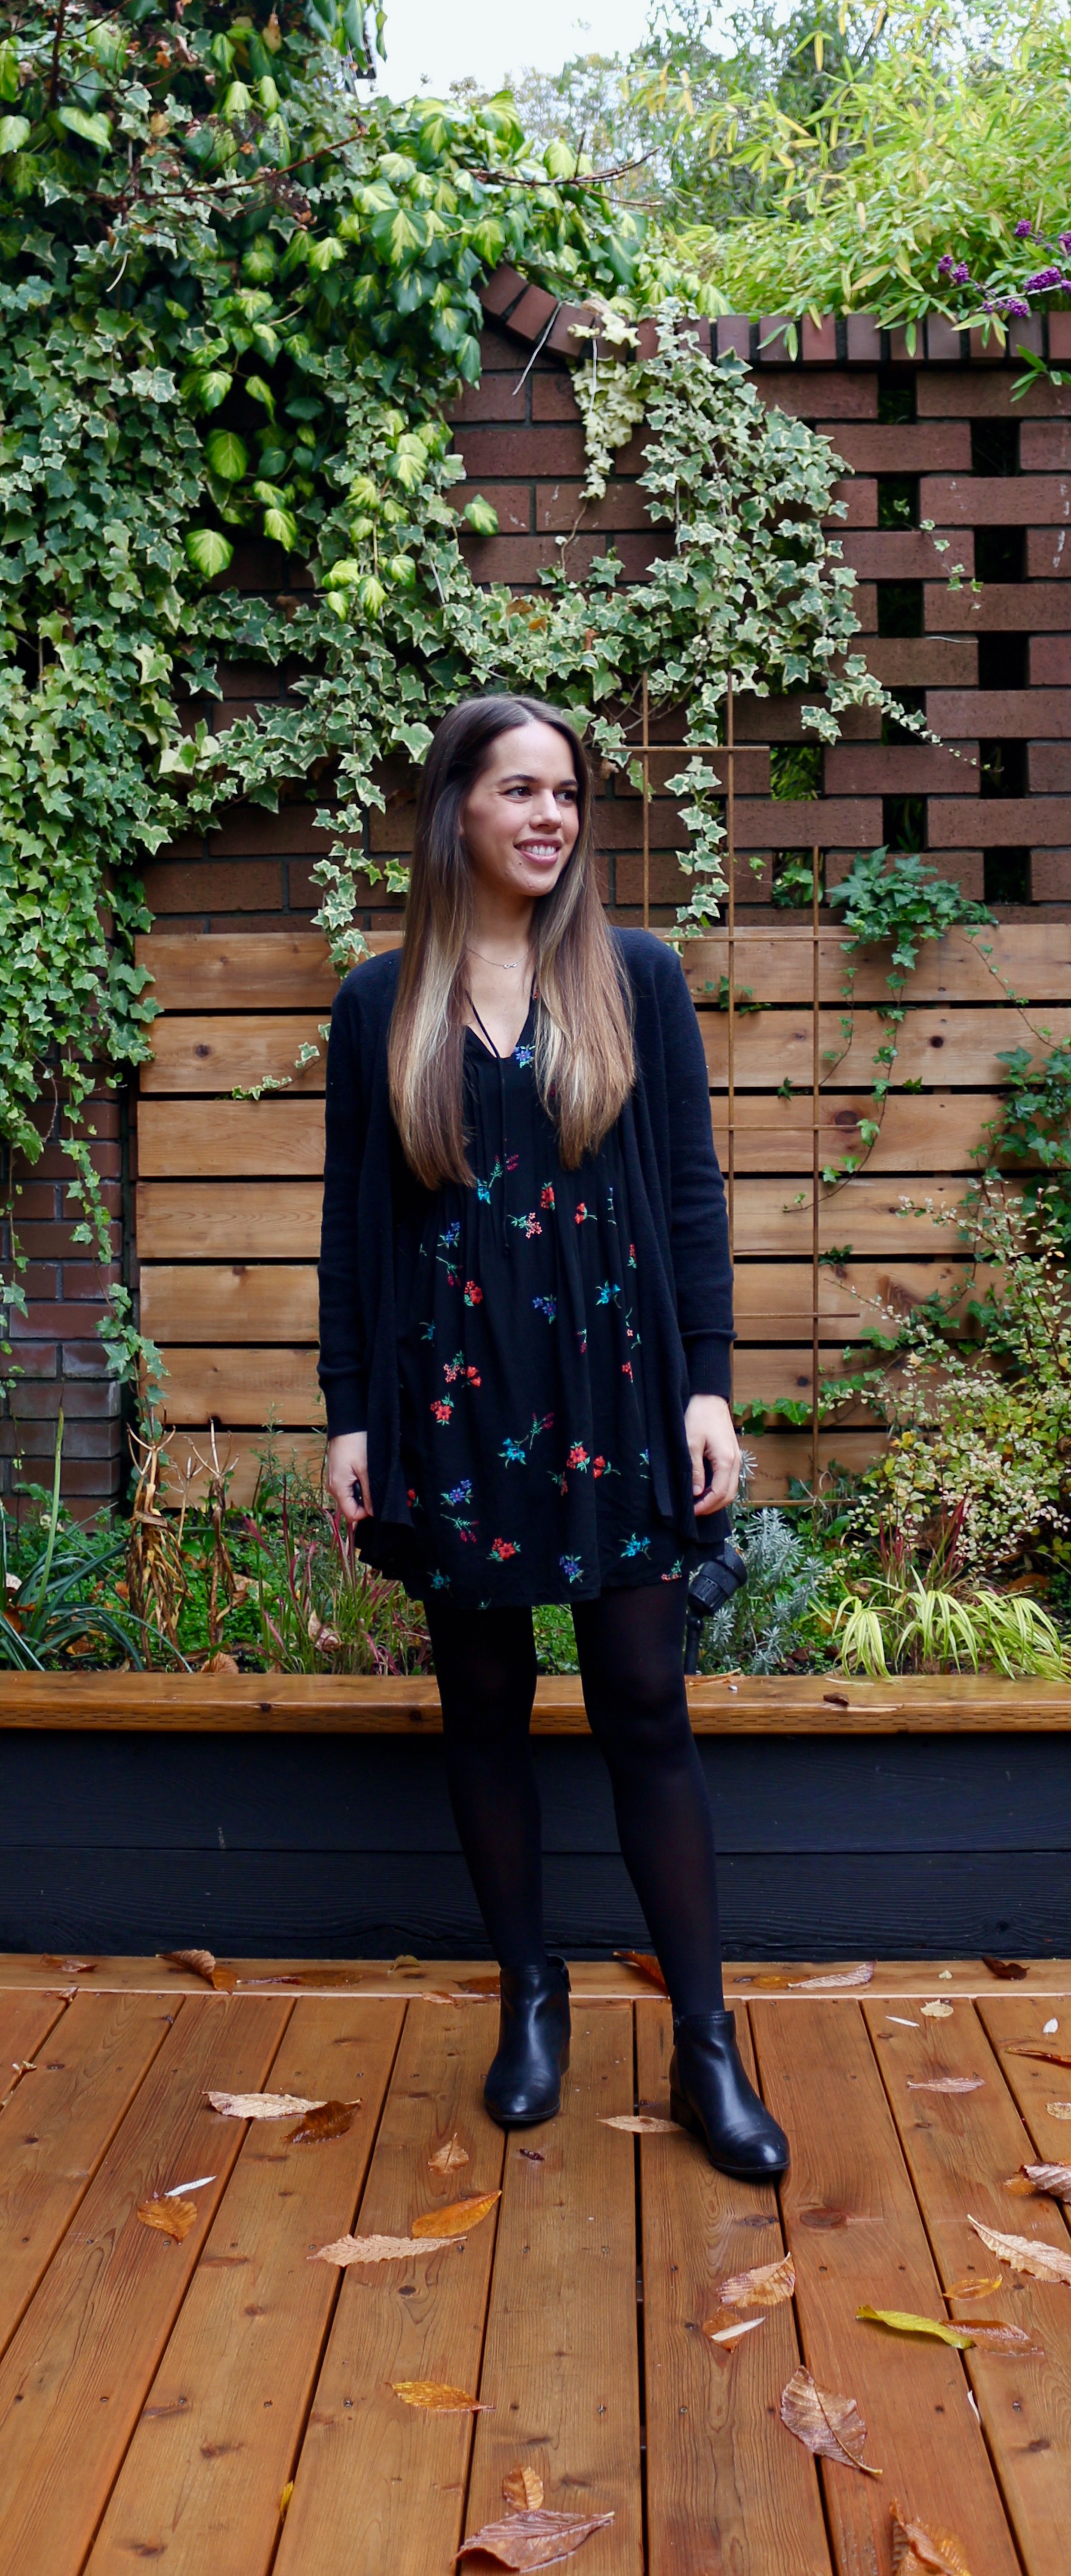 Jules in Flats - Black Floral Swing Dress with Booties (Business Casual Workwear on a Budget)